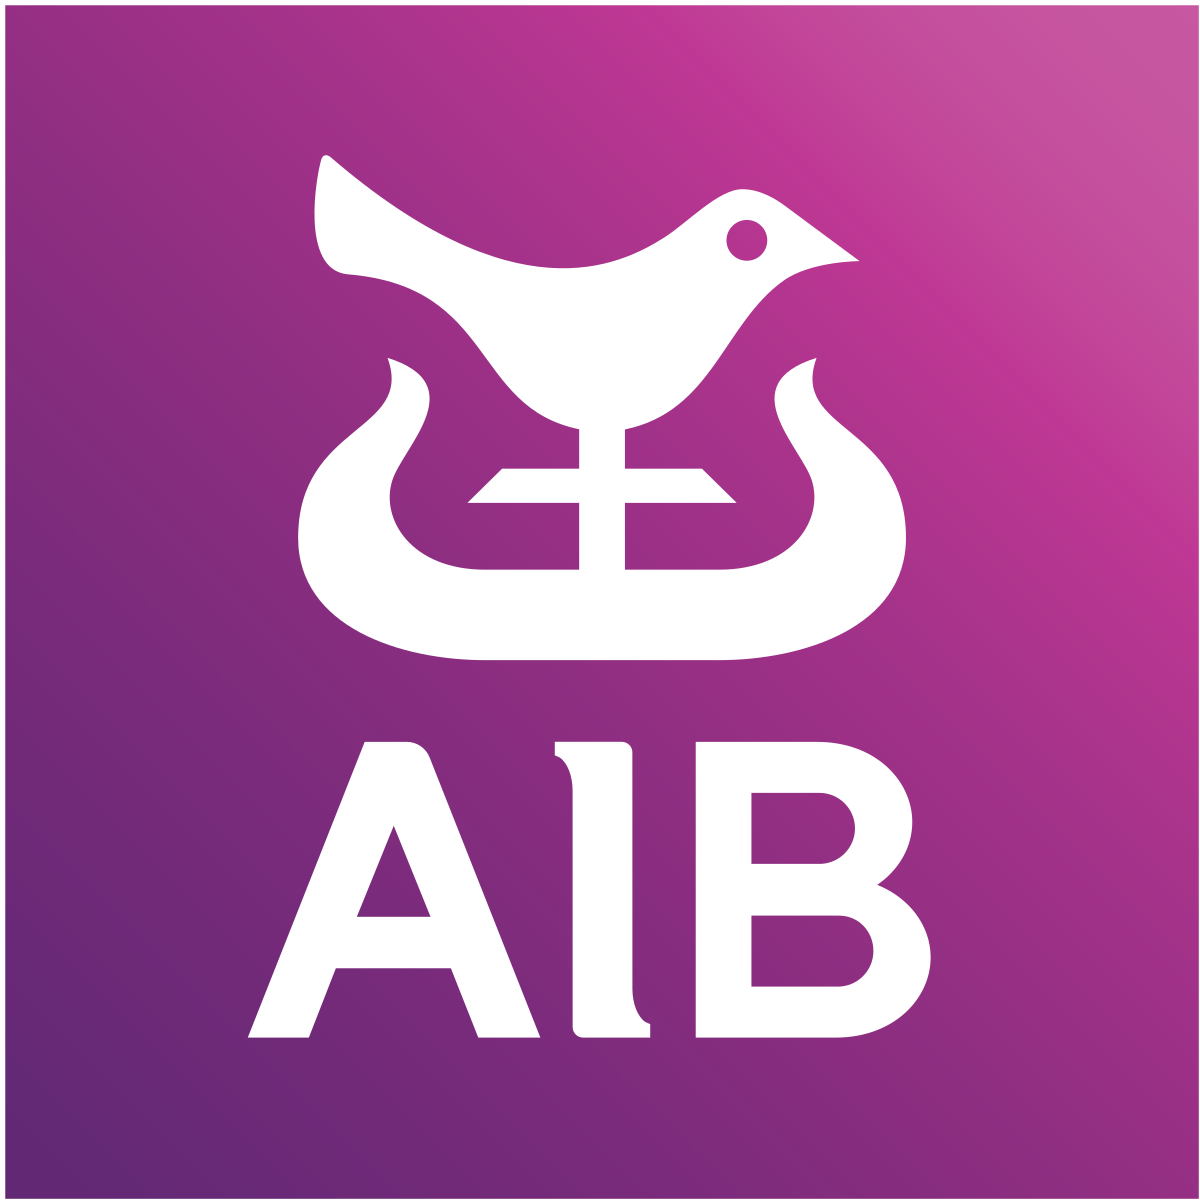 Ireland's AIB fined record 97 mln euros for mortgage overcharging